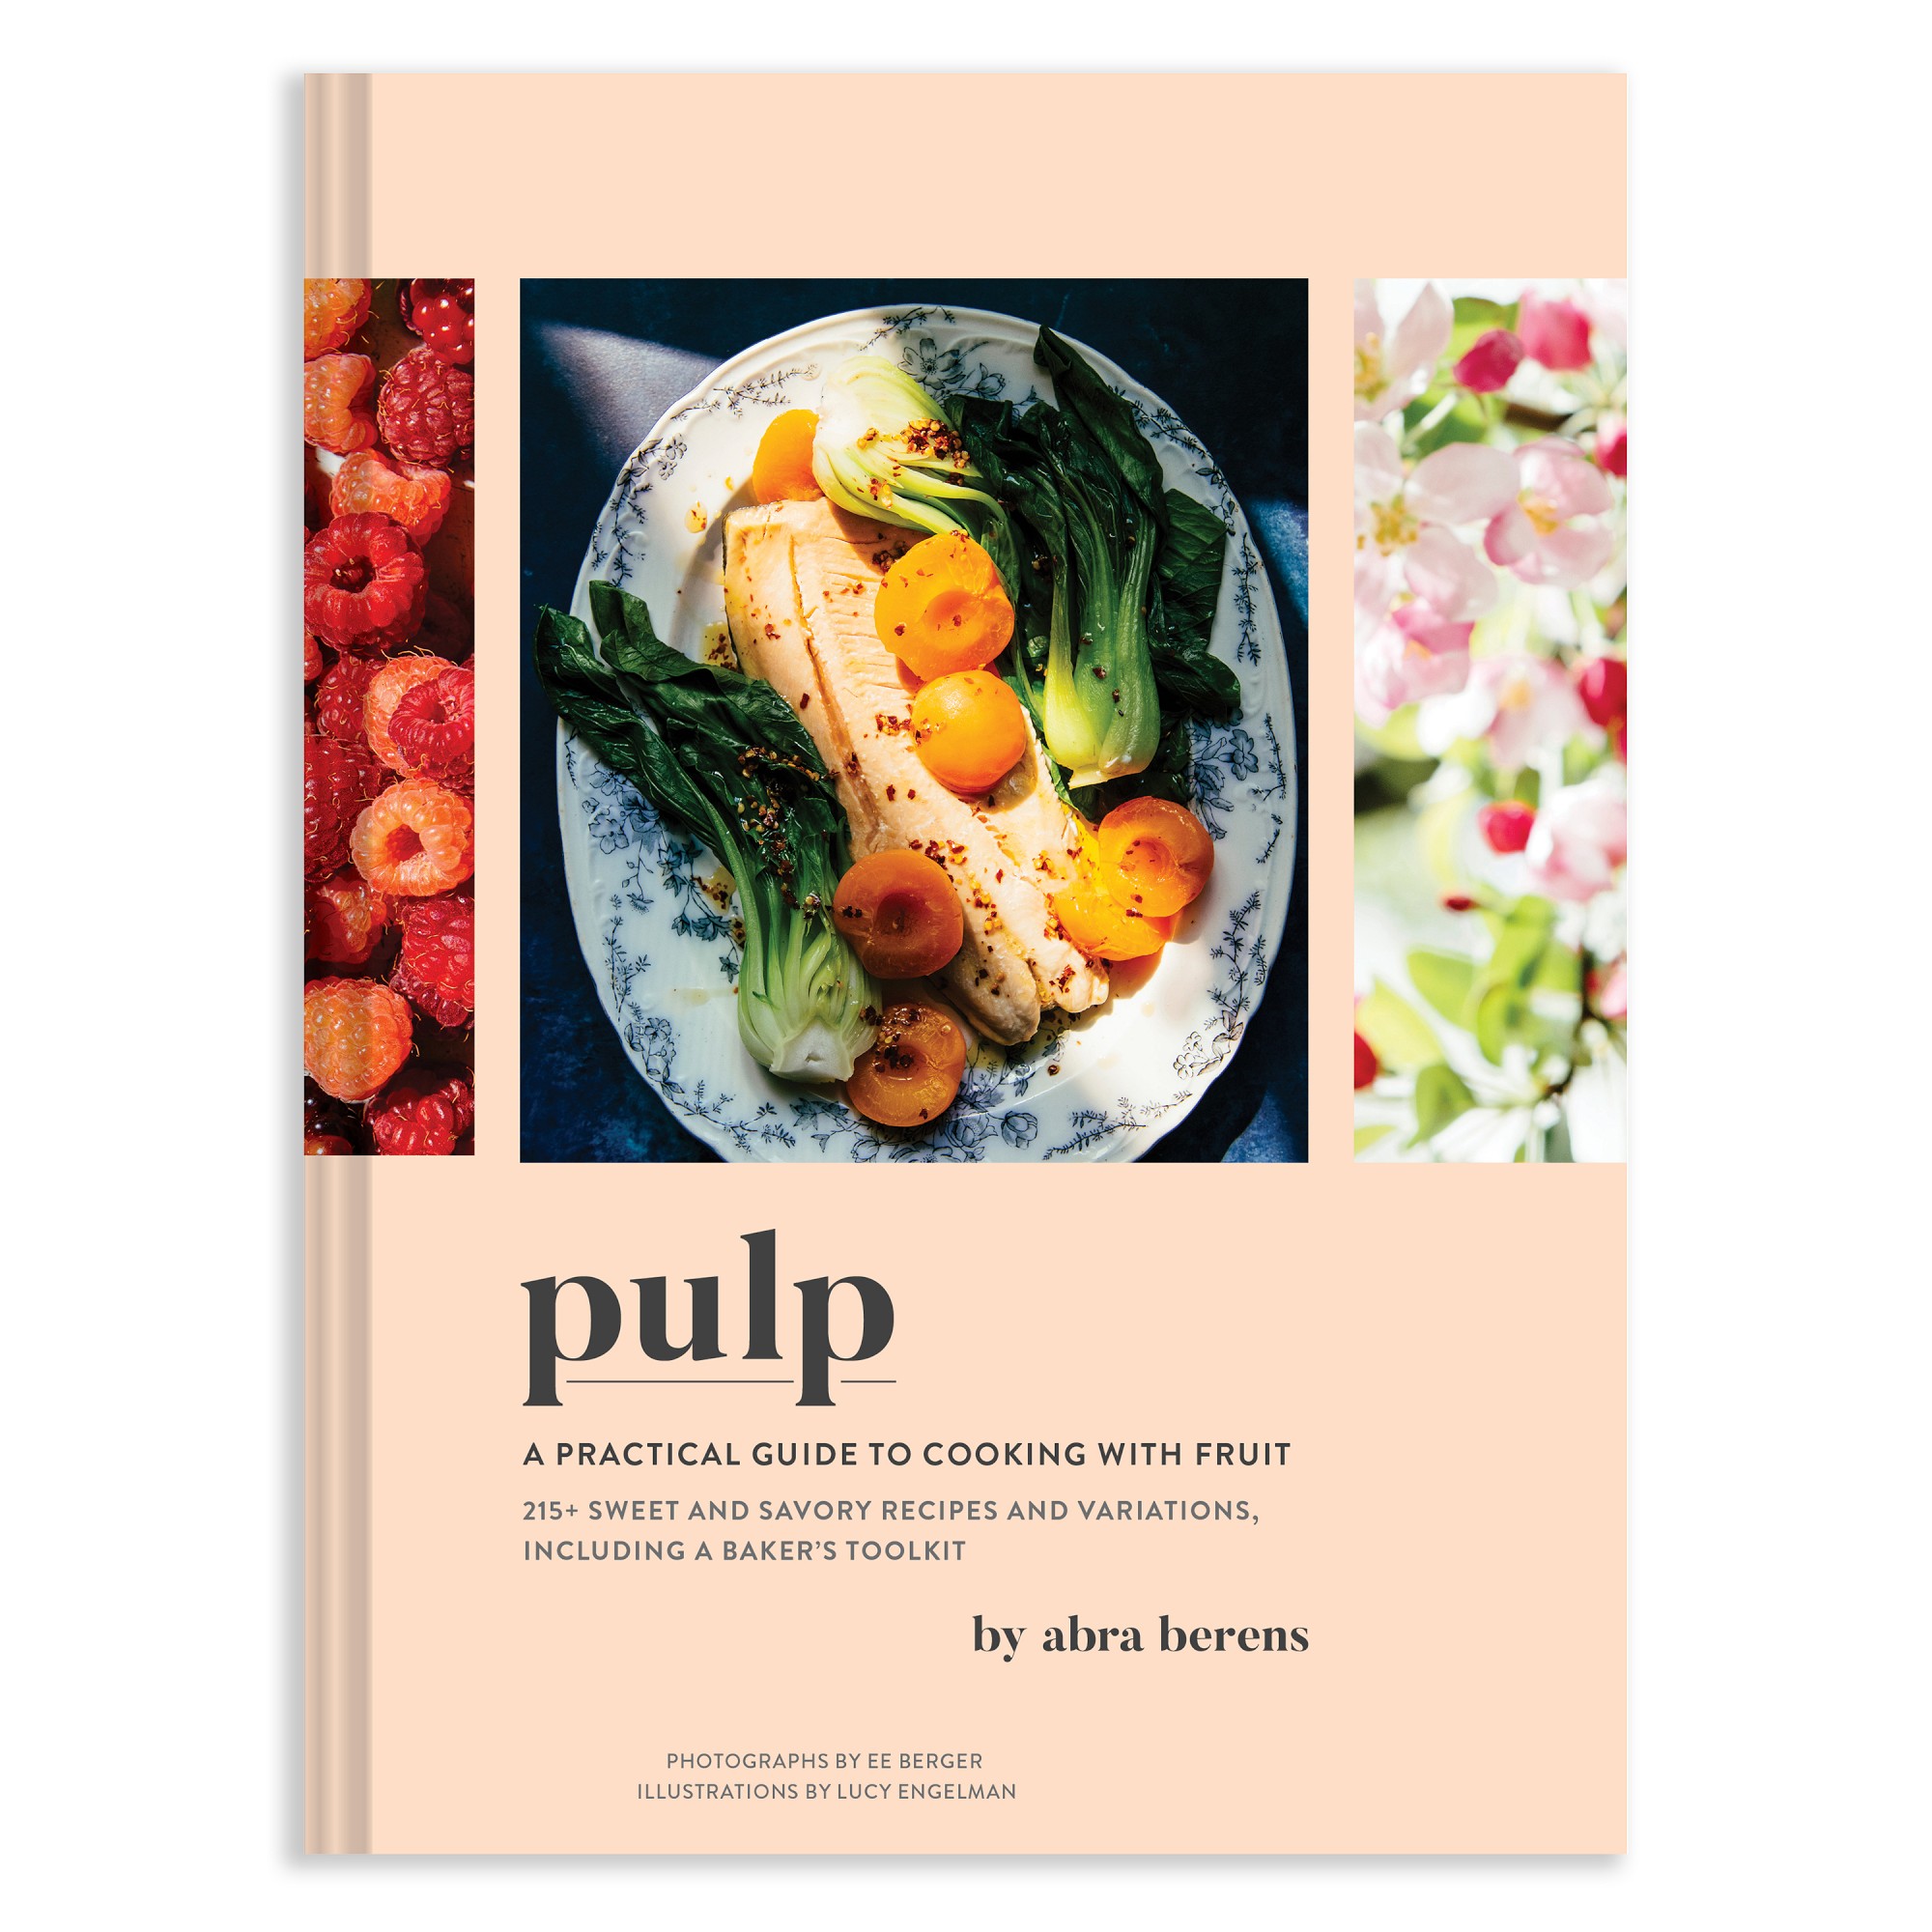 Abra Berens: Pulp: A Practical Guide to Cooking with Fruit